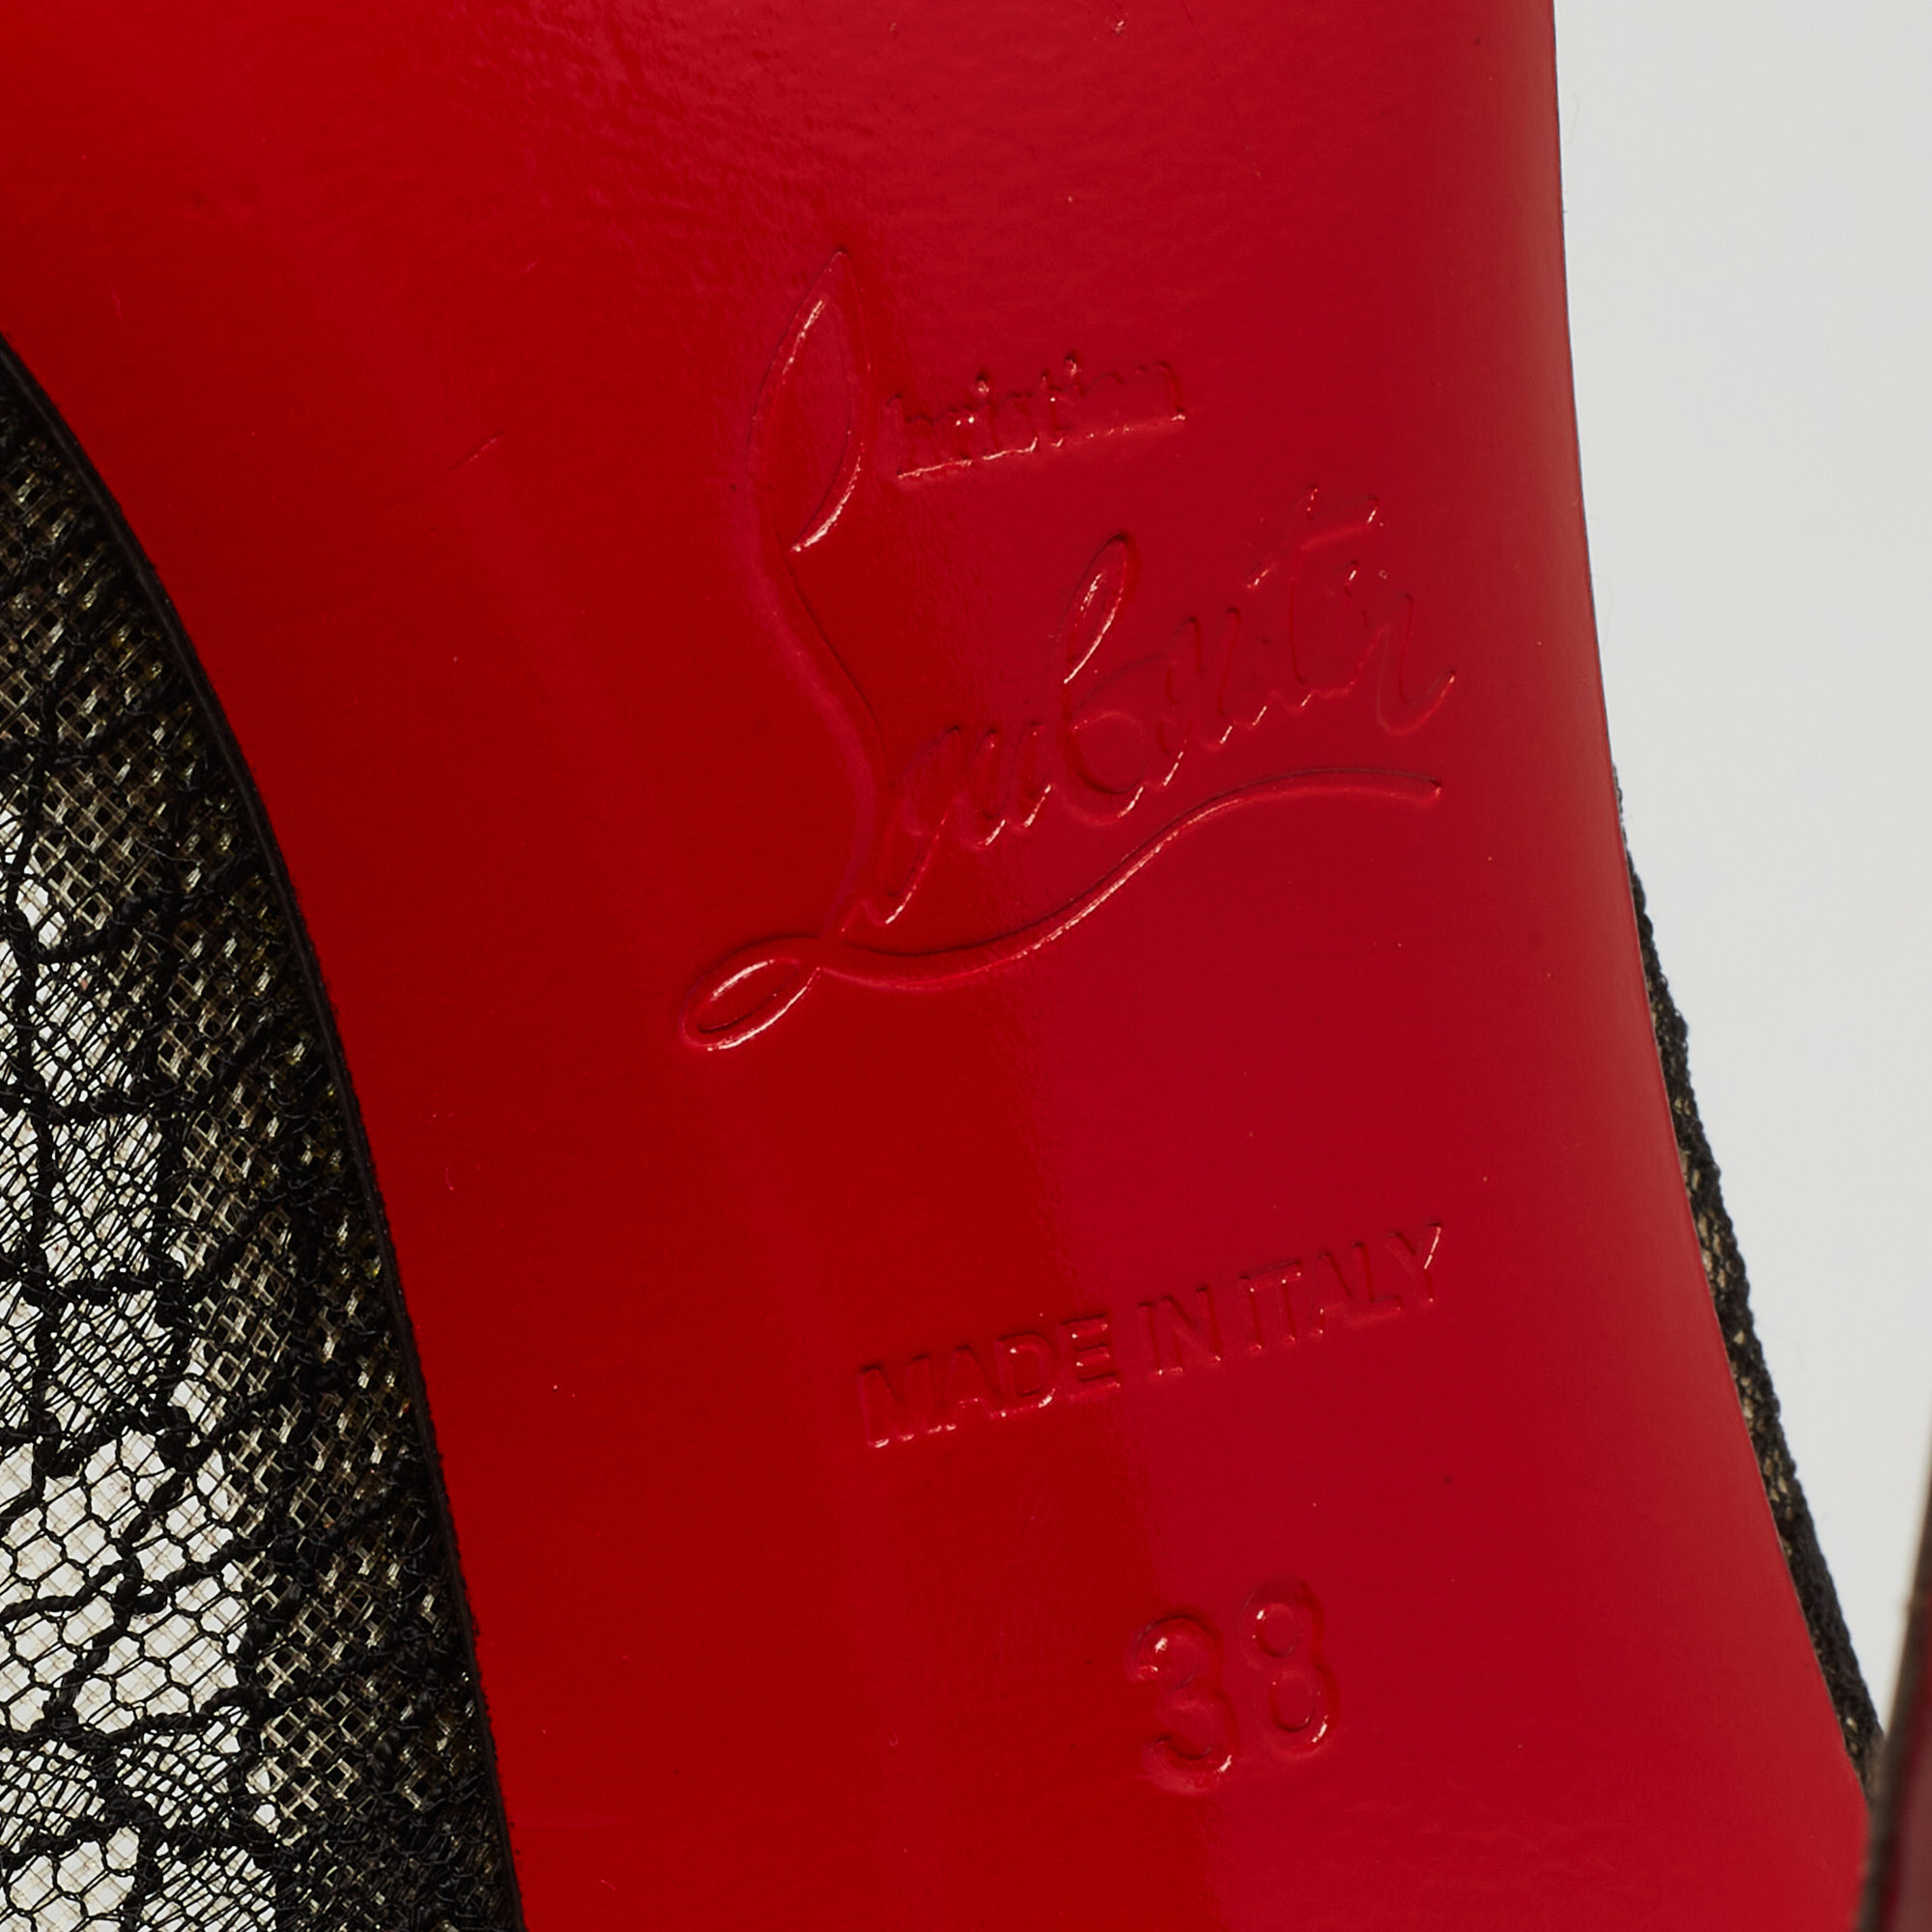 Christian Louboutin Black/Red Lace And Ostrich Leather Candy Spike Round Toe Pumps Size 38